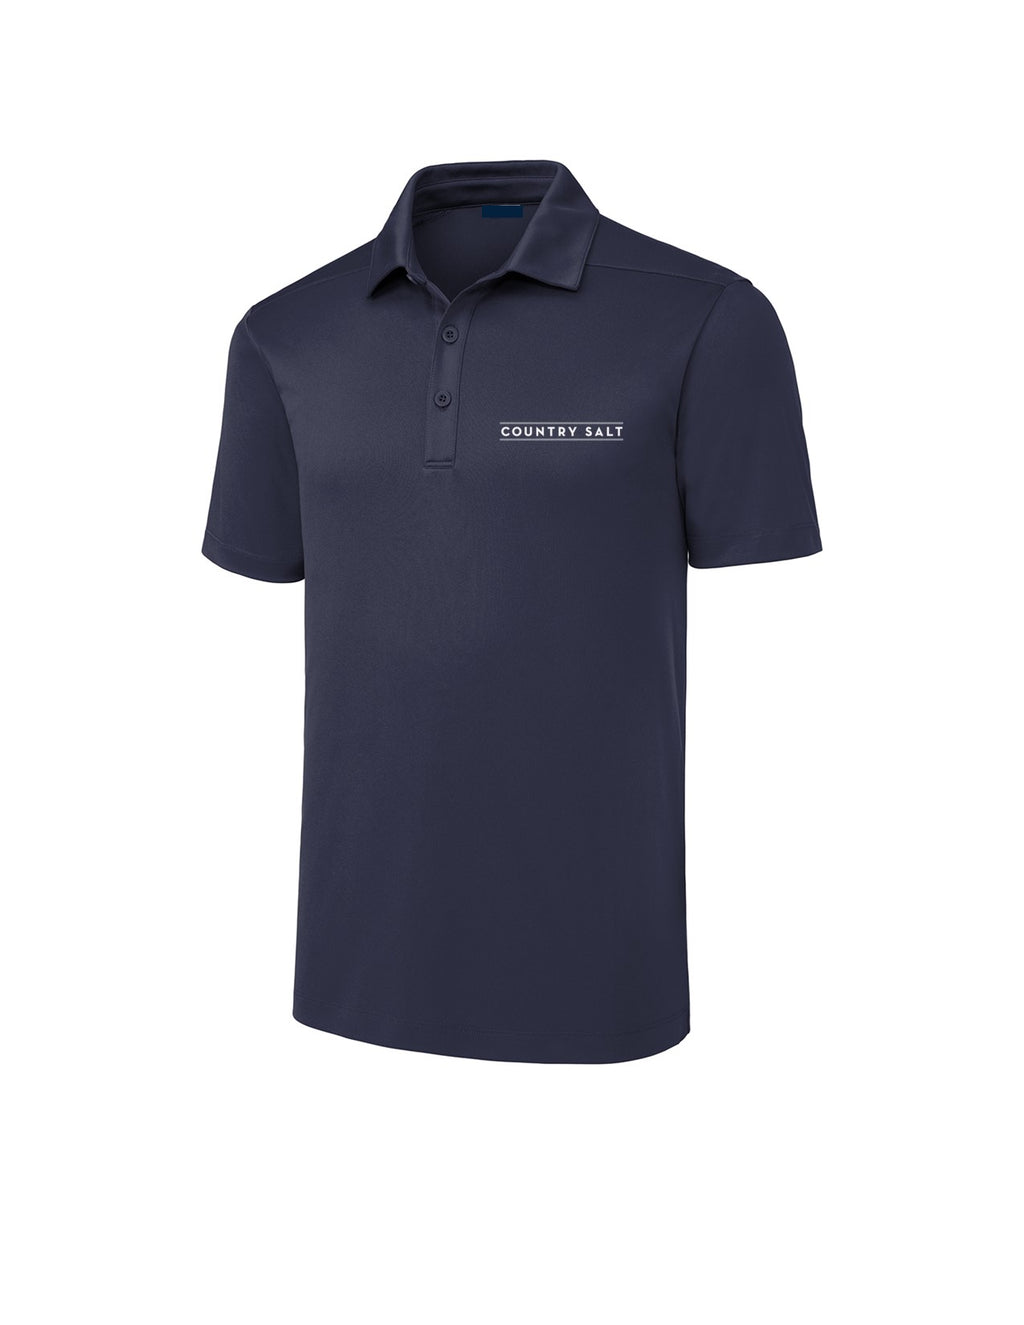 The "B-one-3" Men's Golf Polo